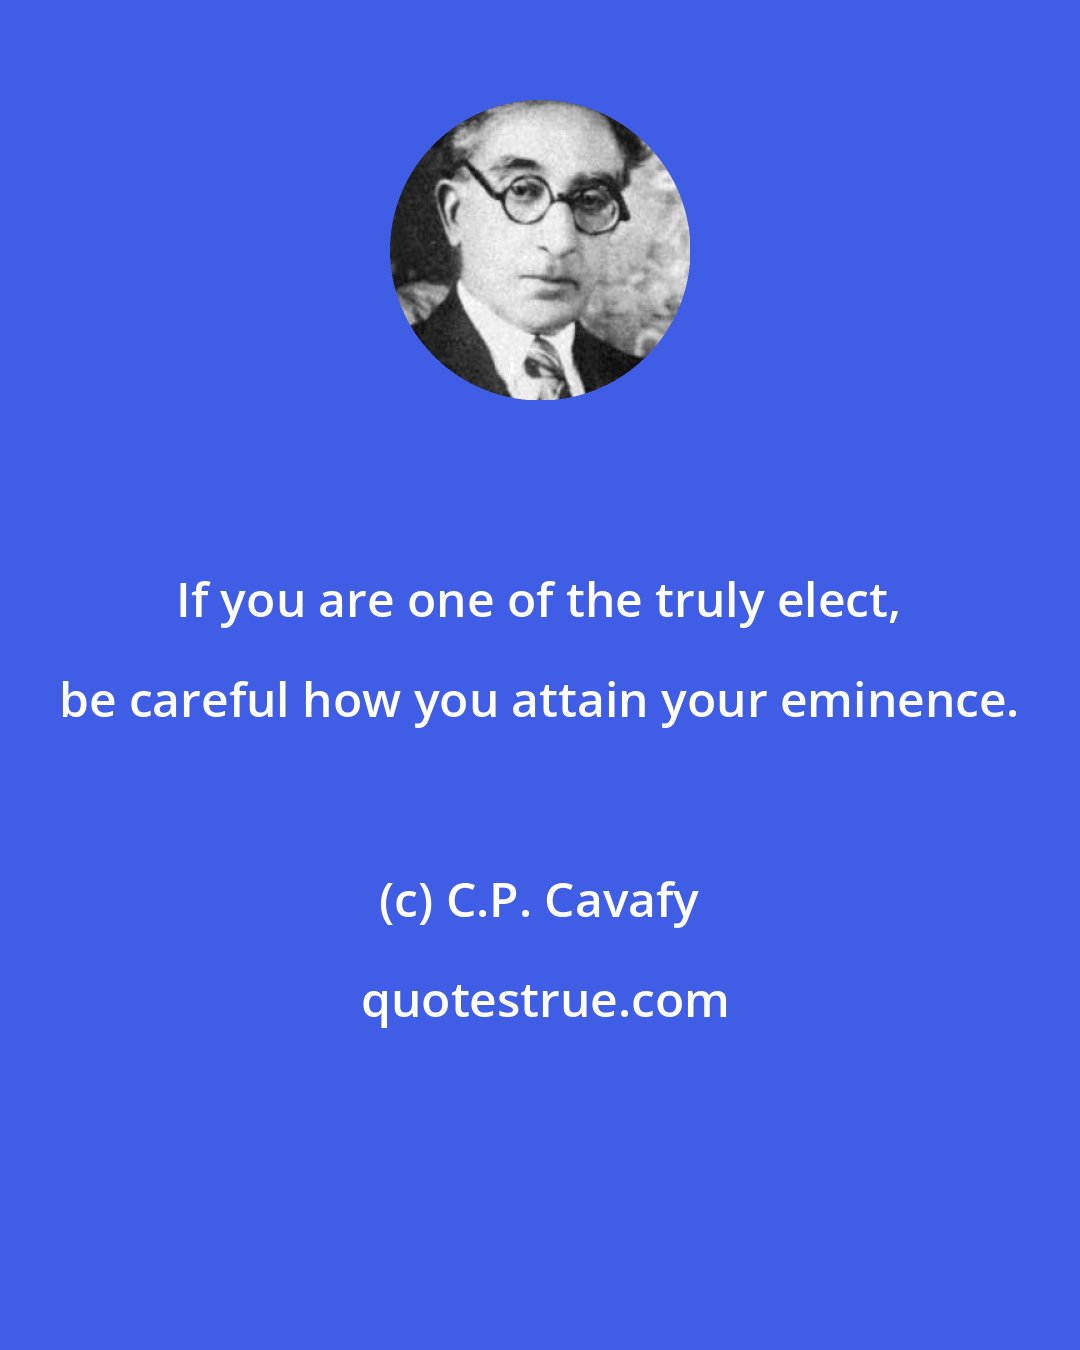 C.P. Cavafy: If you are one of the truly elect, be careful how you attain your eminence.